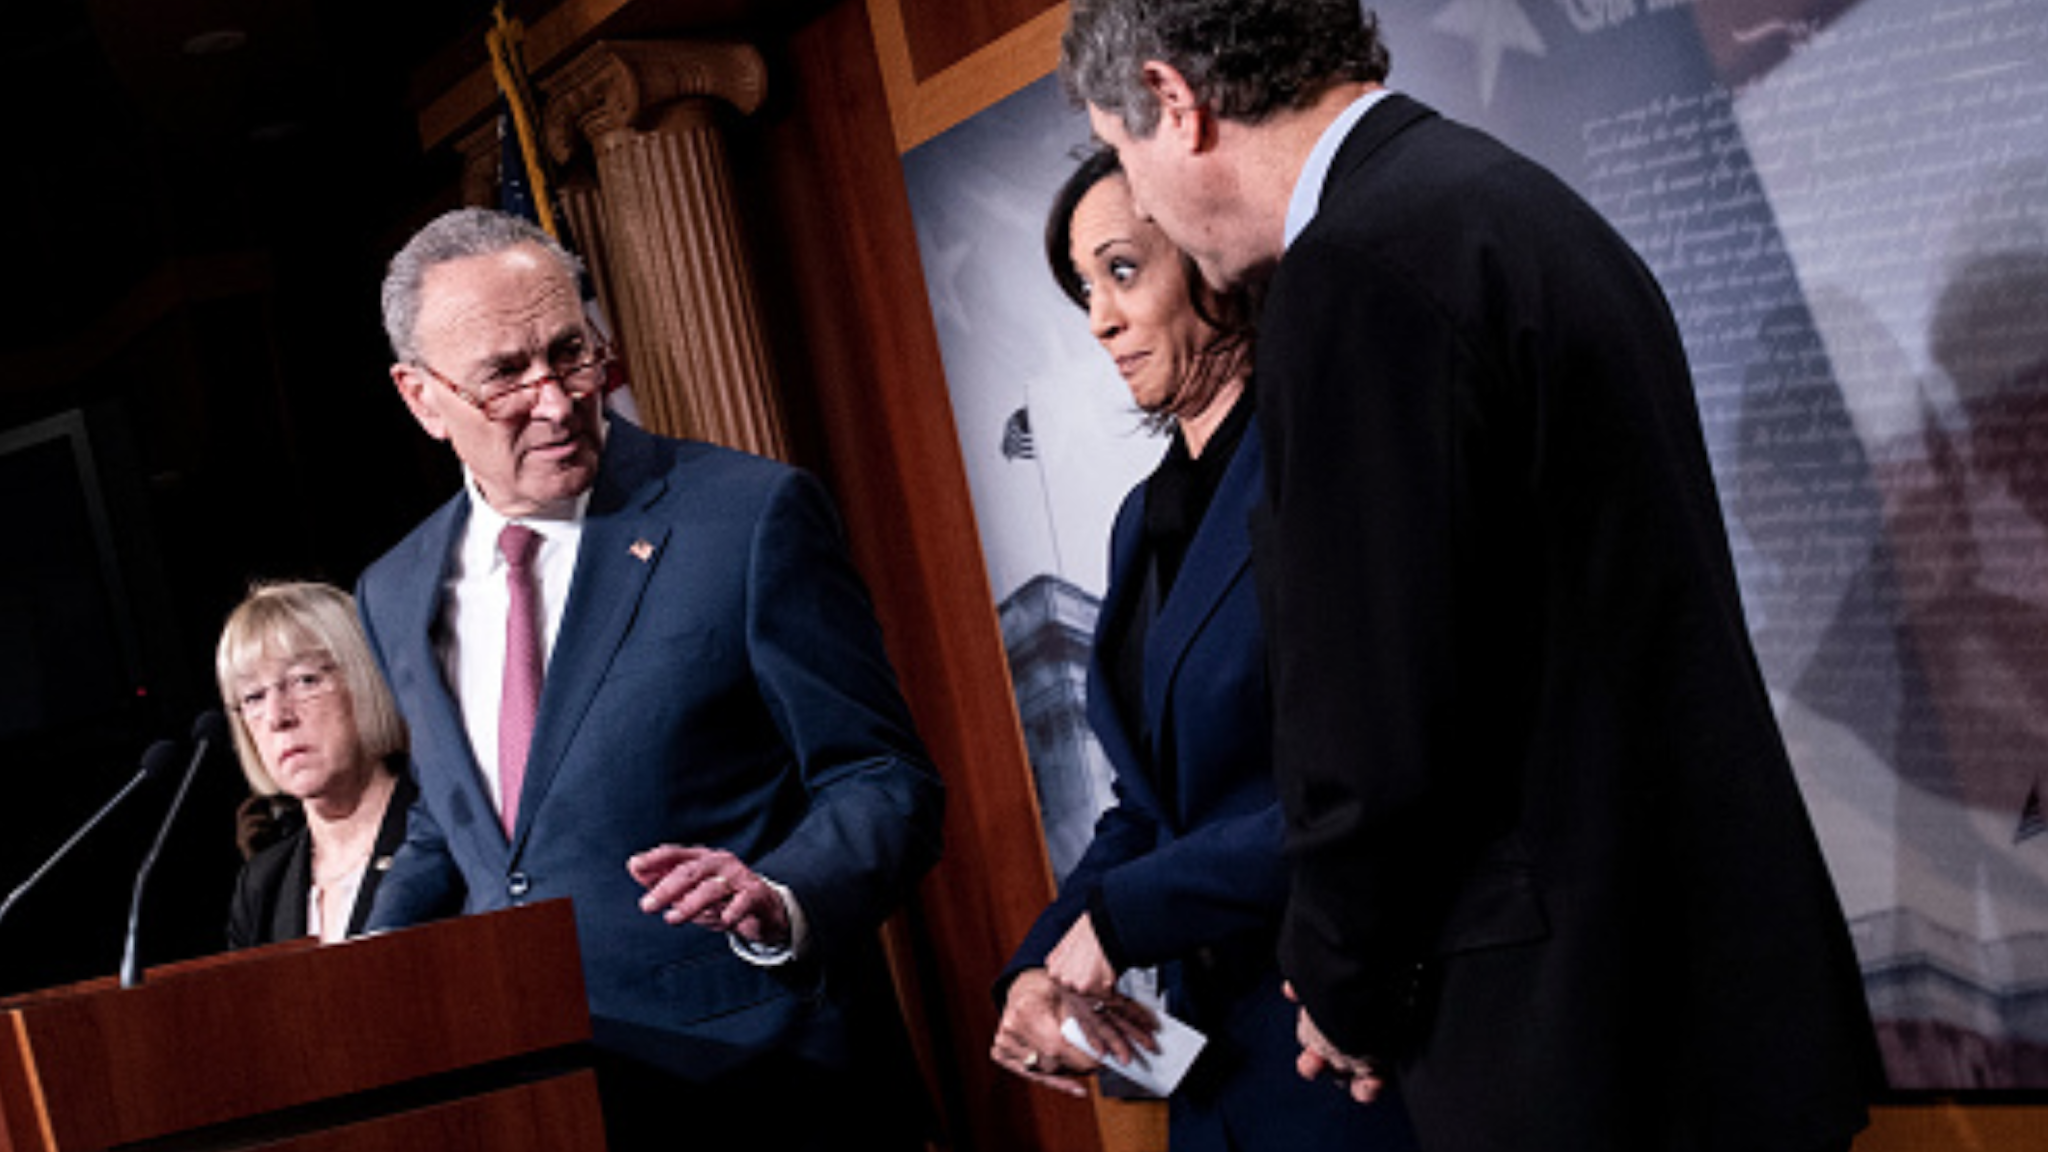 Senator Patty Murray (D-WA) listens while Senate Minority Leader Charles E. Schumer (D-NY) shushes Senator Kamala Harris (D-CA) and Senator Sherrod Brown (D-OH) during a press conference during the impeachment trial of US President Donald Trump on Capitol Hill January 31, 2020, in Washington, DC. - The US Senate could acquit Donald Trump of impeachment charges as early as January 31, 2020 after Democratic efforts to call trial witnesses appeared to fall short, handing the president a decisive political victory heading into a tough re-election fight.